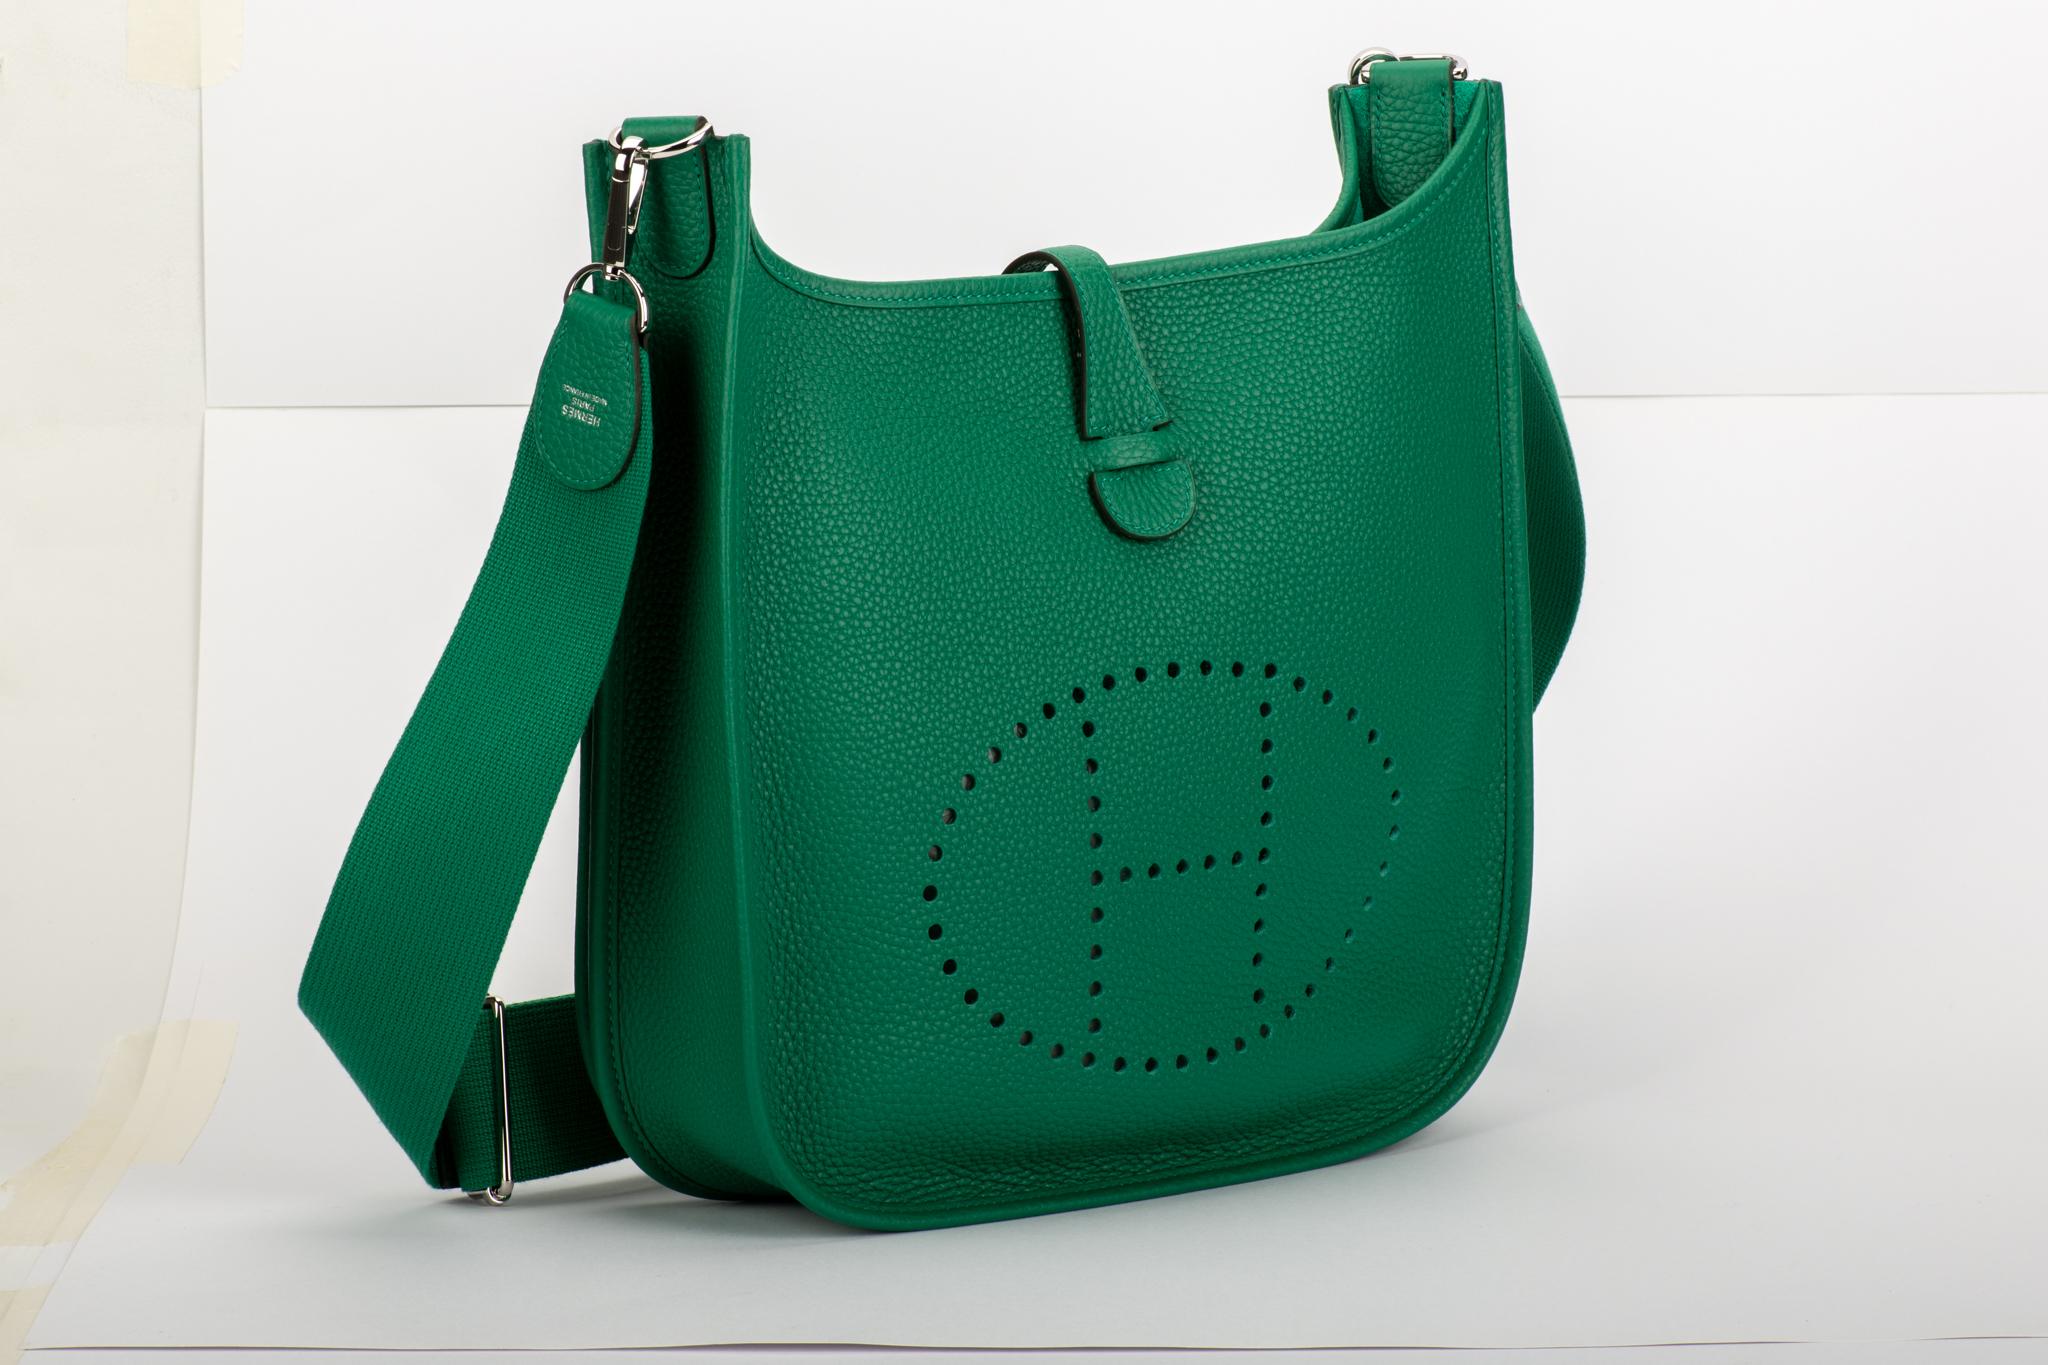 NEW rare Hermès vert vertigo clemence leather medium evelyne with palladium hardware. Adjustable multicolor shoulder strap, can be worn cross body. Date stamp C in a square, 2018. Comes with original duster, shoulder strap, box, ribbon.
